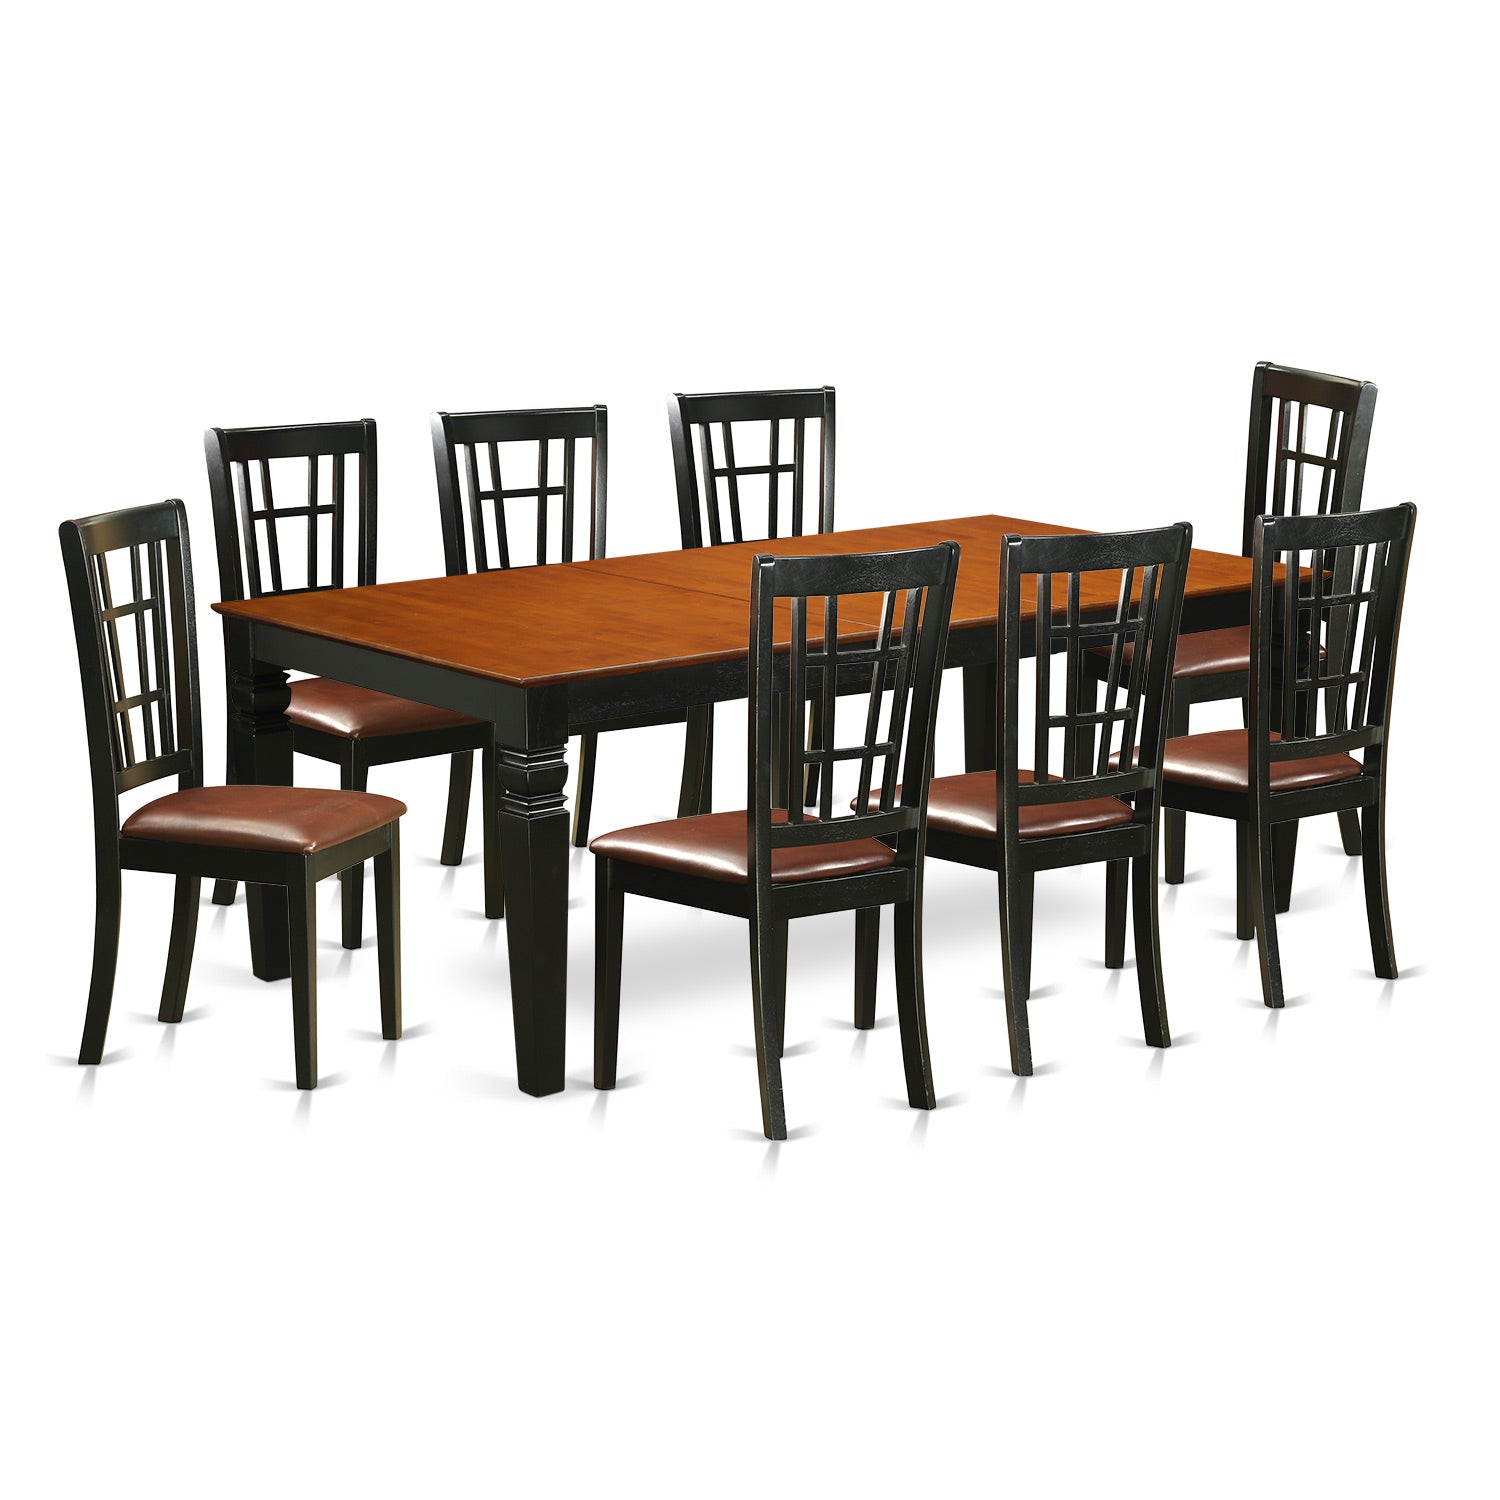 LGNI9-BCH-LC 9 PC Kitchen Table set with a Dining Table and 8 Dining Chairs in Black and Cherry